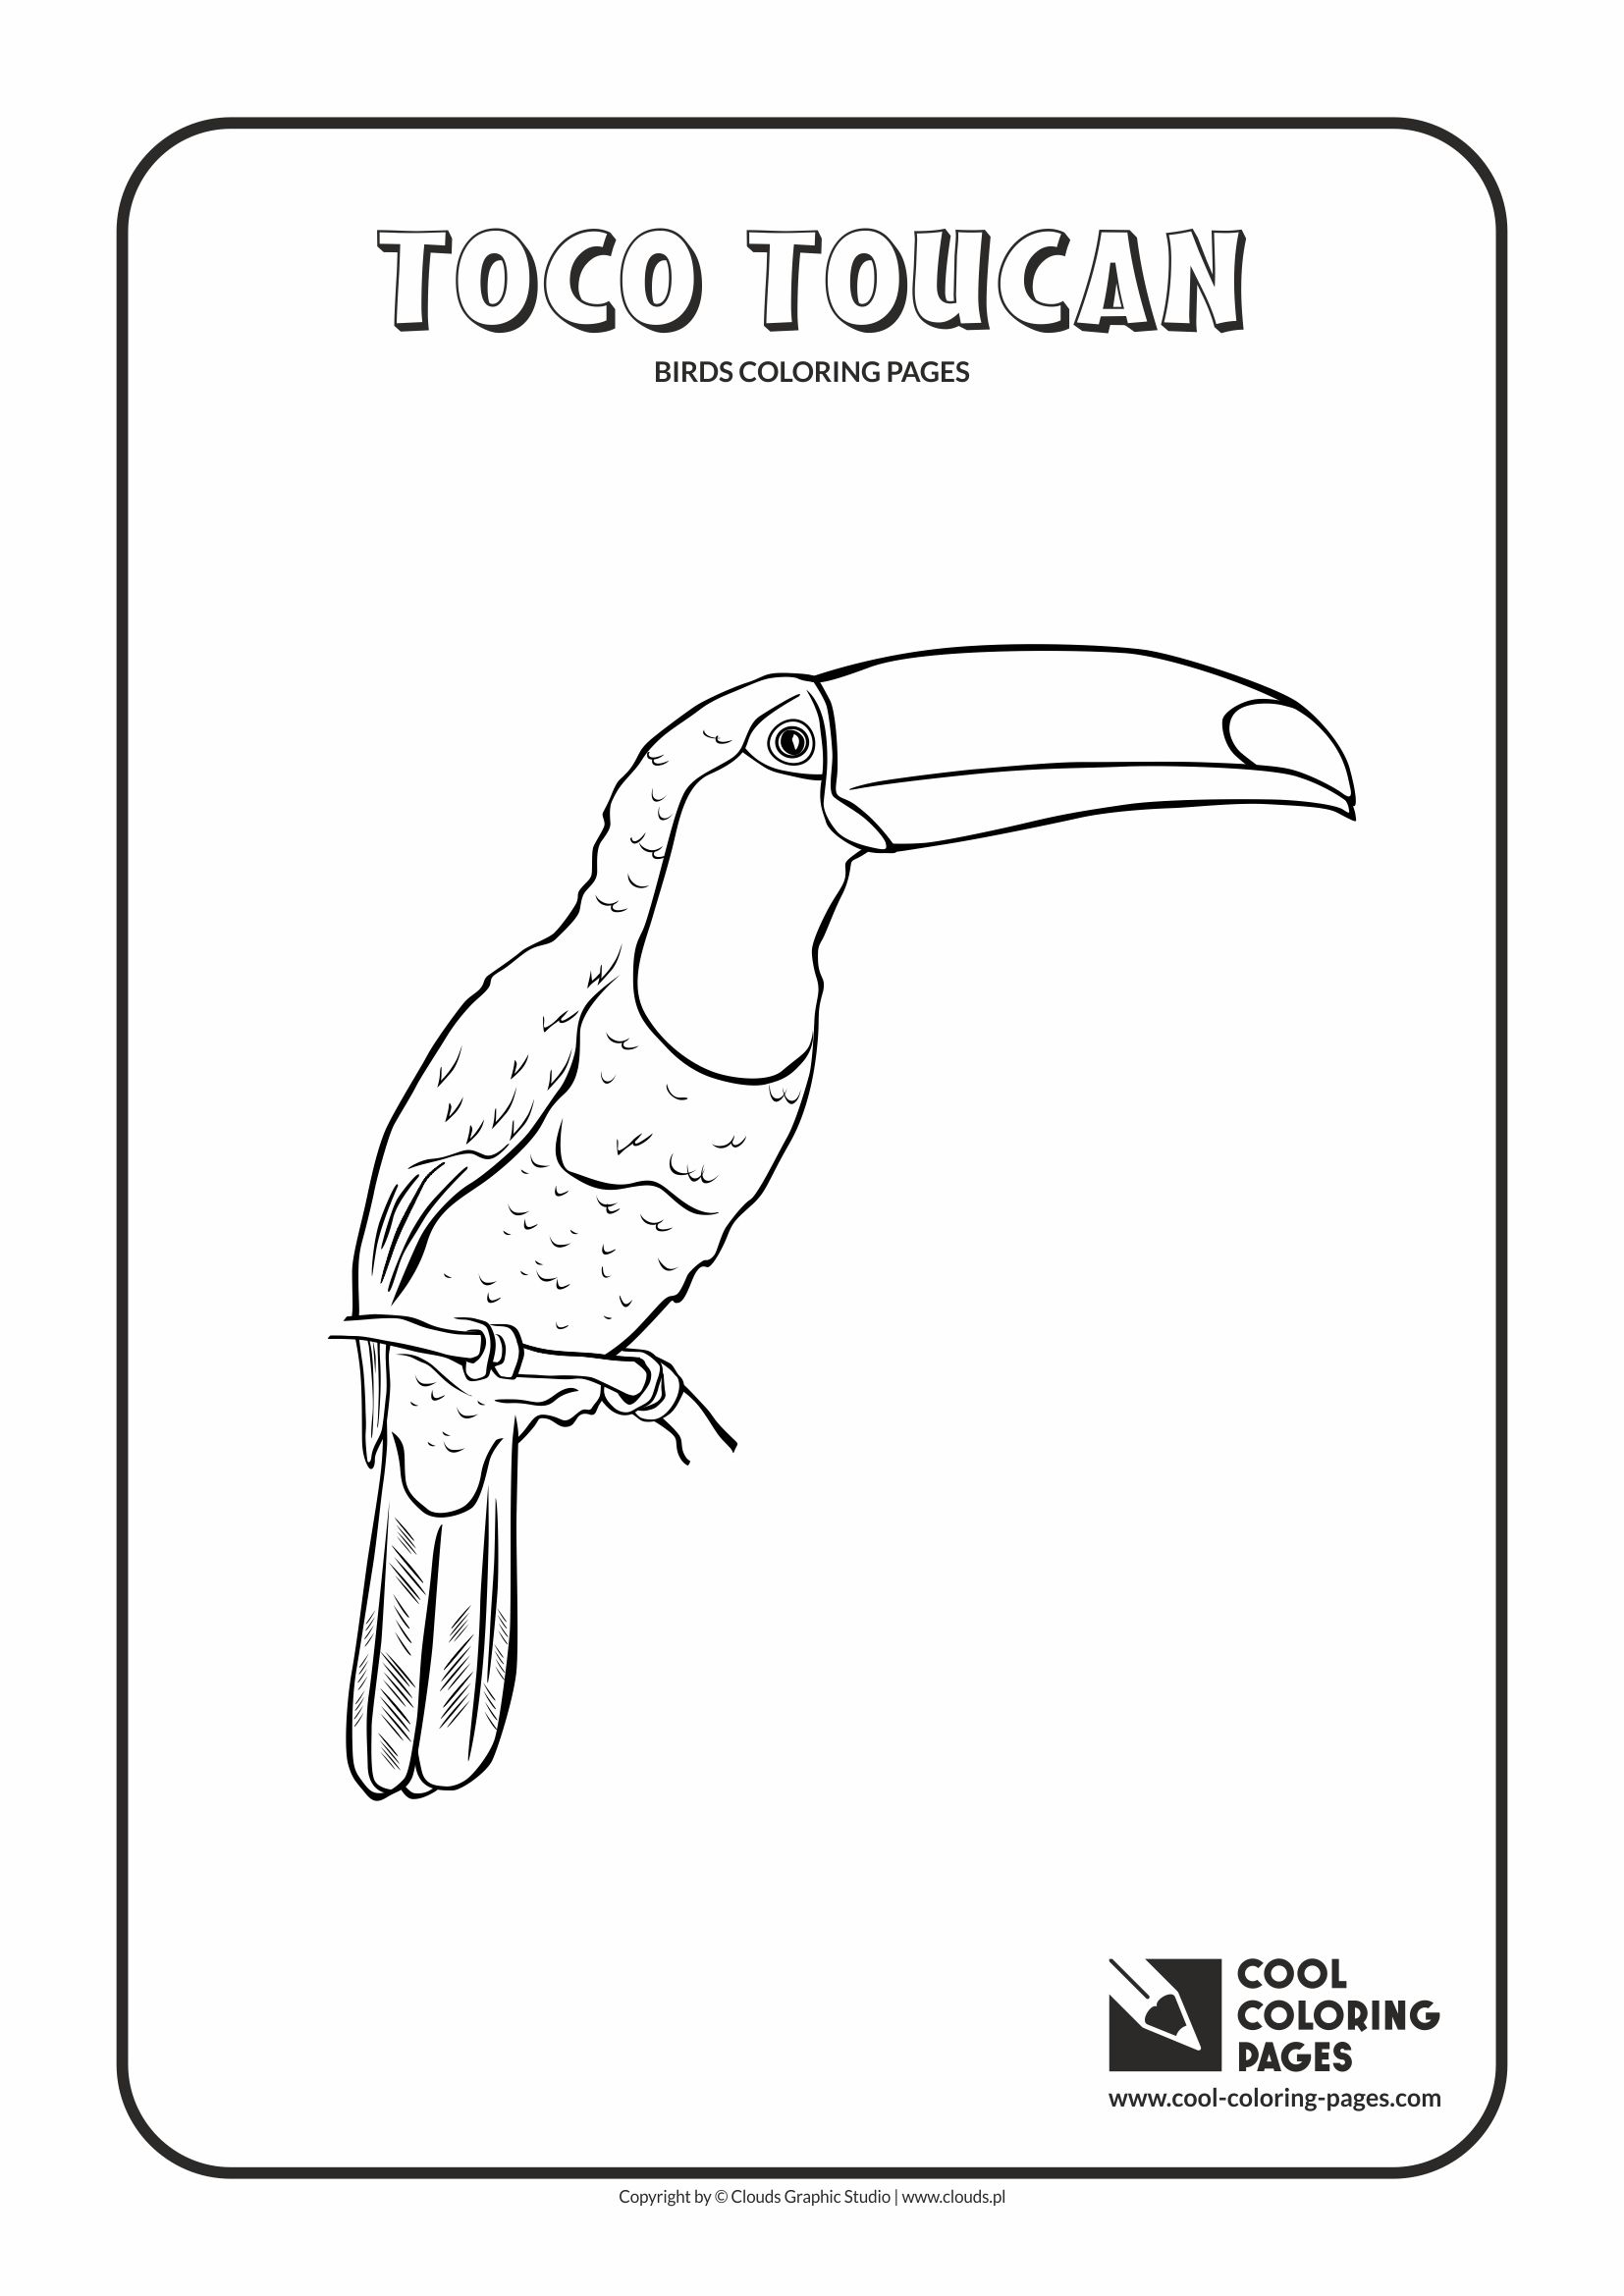 Cool Coloring Pages - Animals / Toco toucan / Coloring page with toco toucan